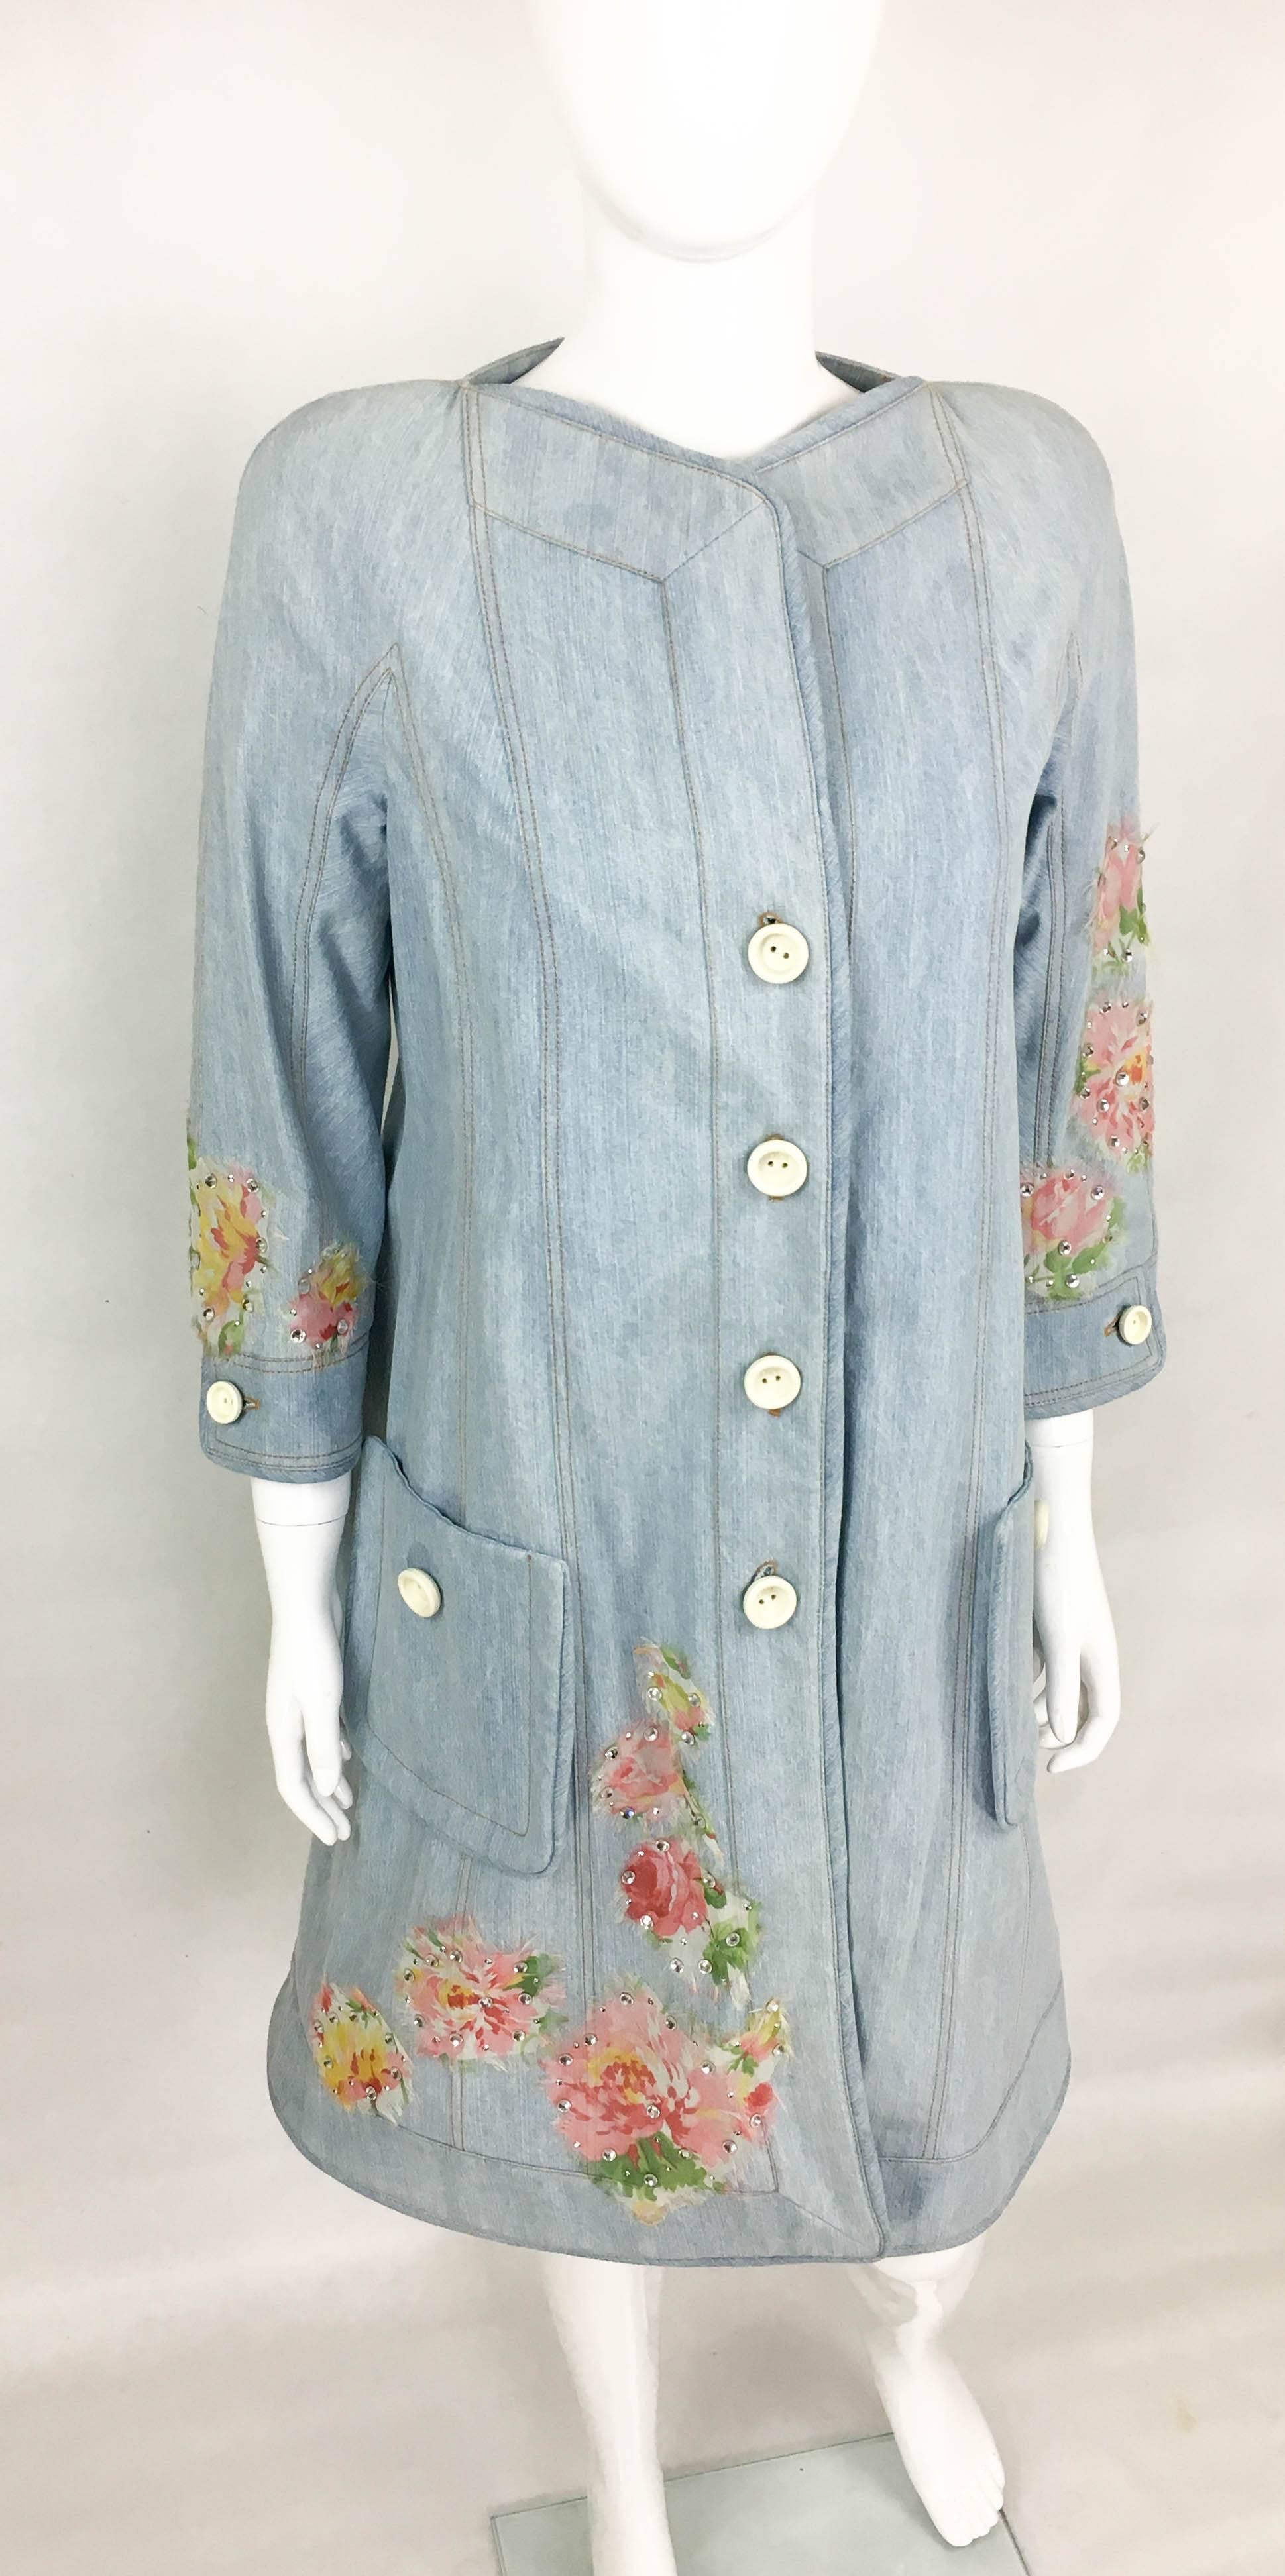 Dior by Galliano 2005 Runway Look Denim Shirt Dress With Crystals and Appliqués In Excellent Condition For Sale In London, Chelsea